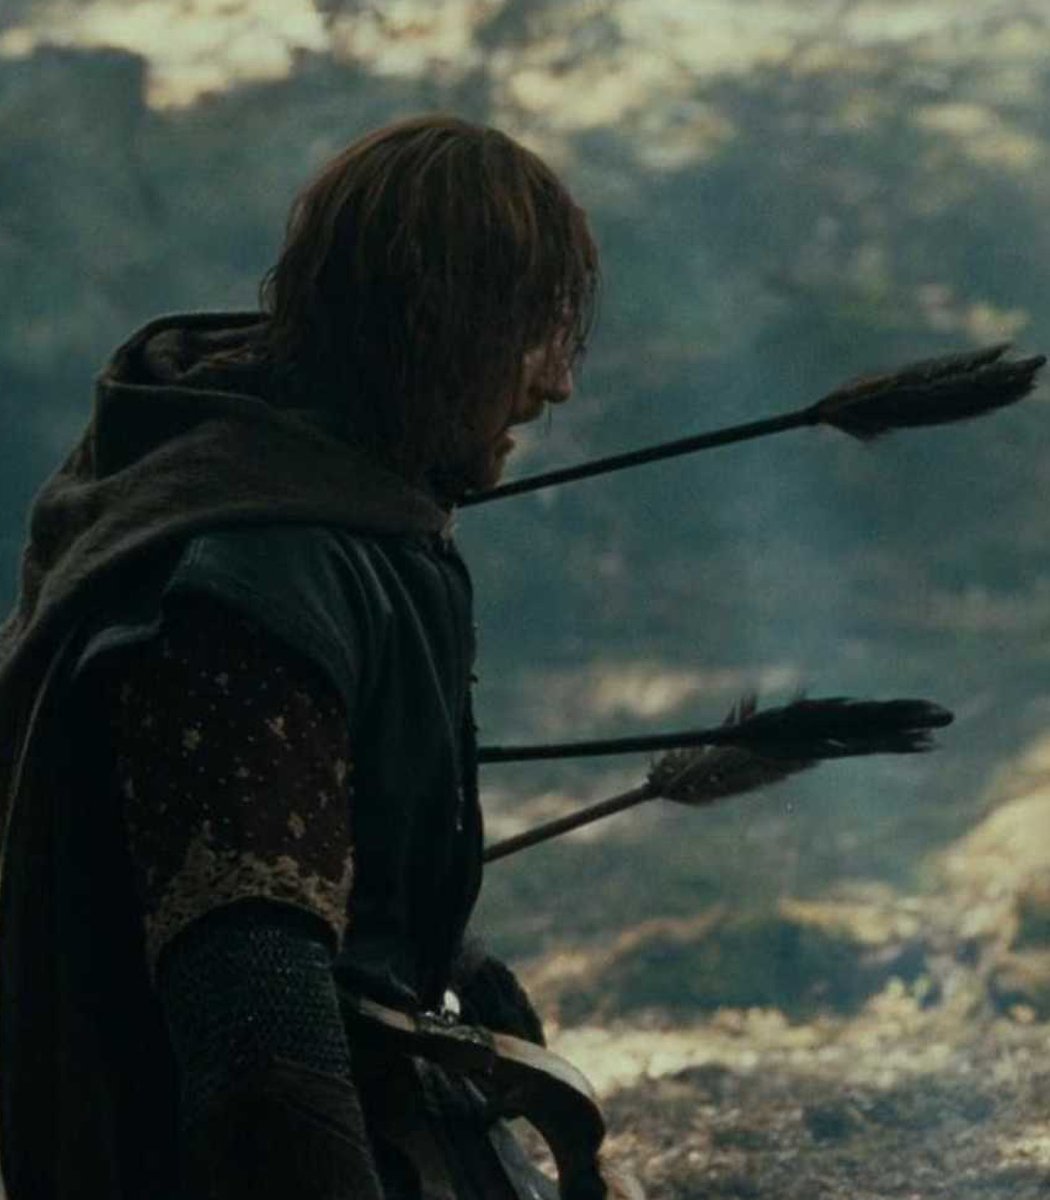 In Lord of The Rings, Sean is shot with arrows!We have these lint arrowheads found in an Early Bronze Age barrow near Scarborough. The central tang would have attached to a wooden arrow shaft and the barbs ensured the arrow stayed in the prey, causing maximum damage!